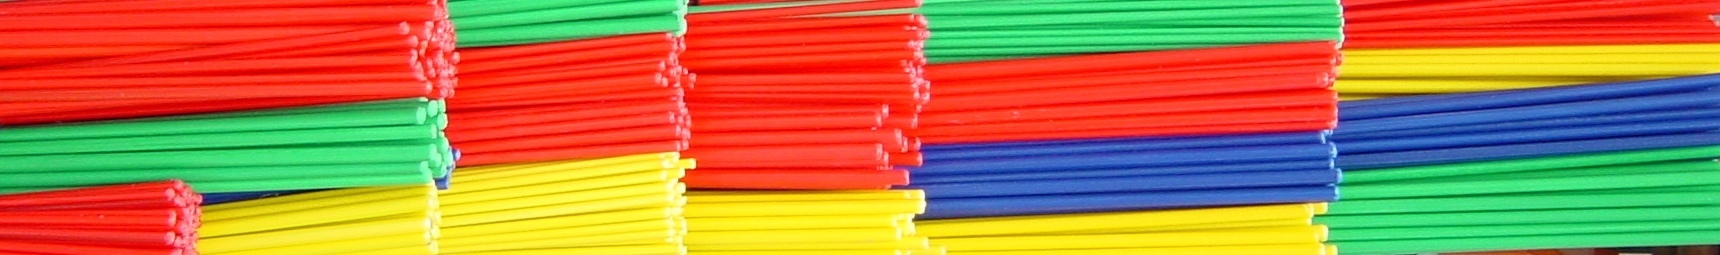 plastic coated thermoplastic composite rods